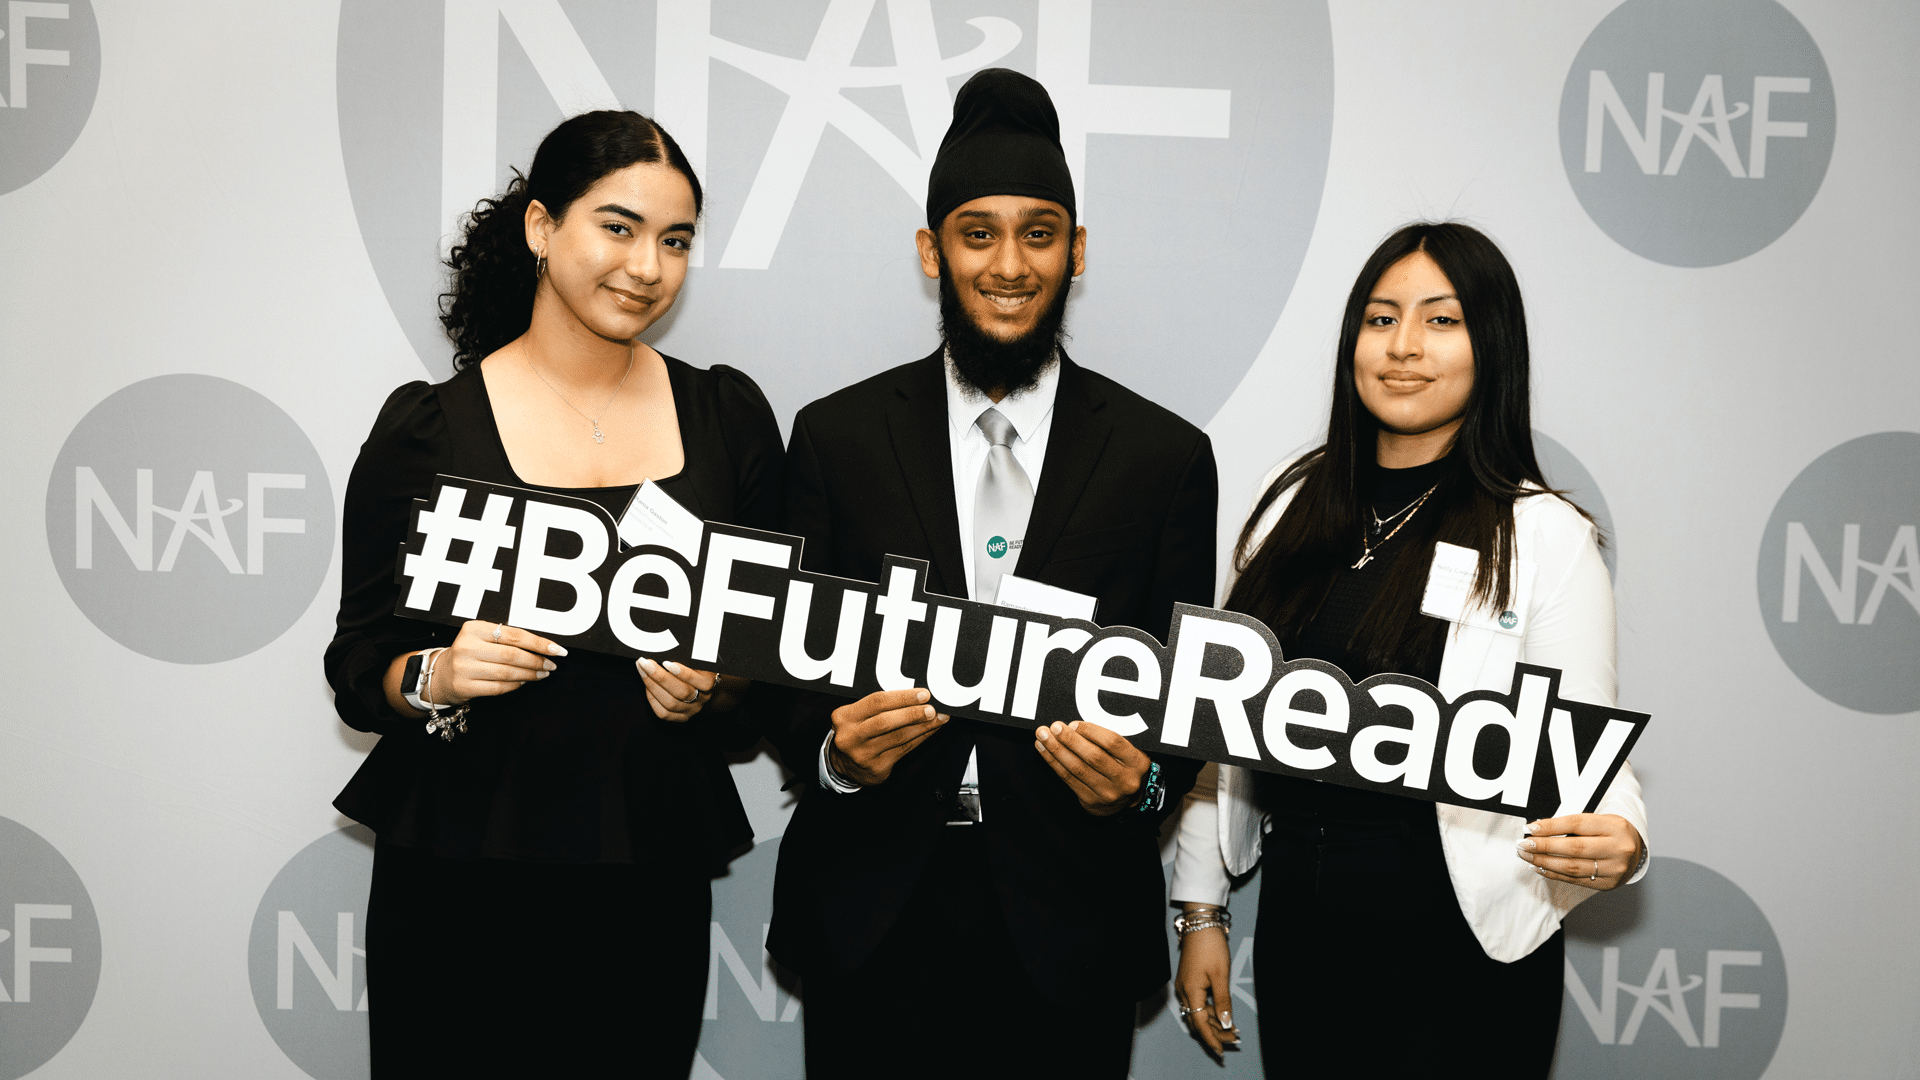 Youth at NAF event holding up sign that reads "#BeFutureReady"